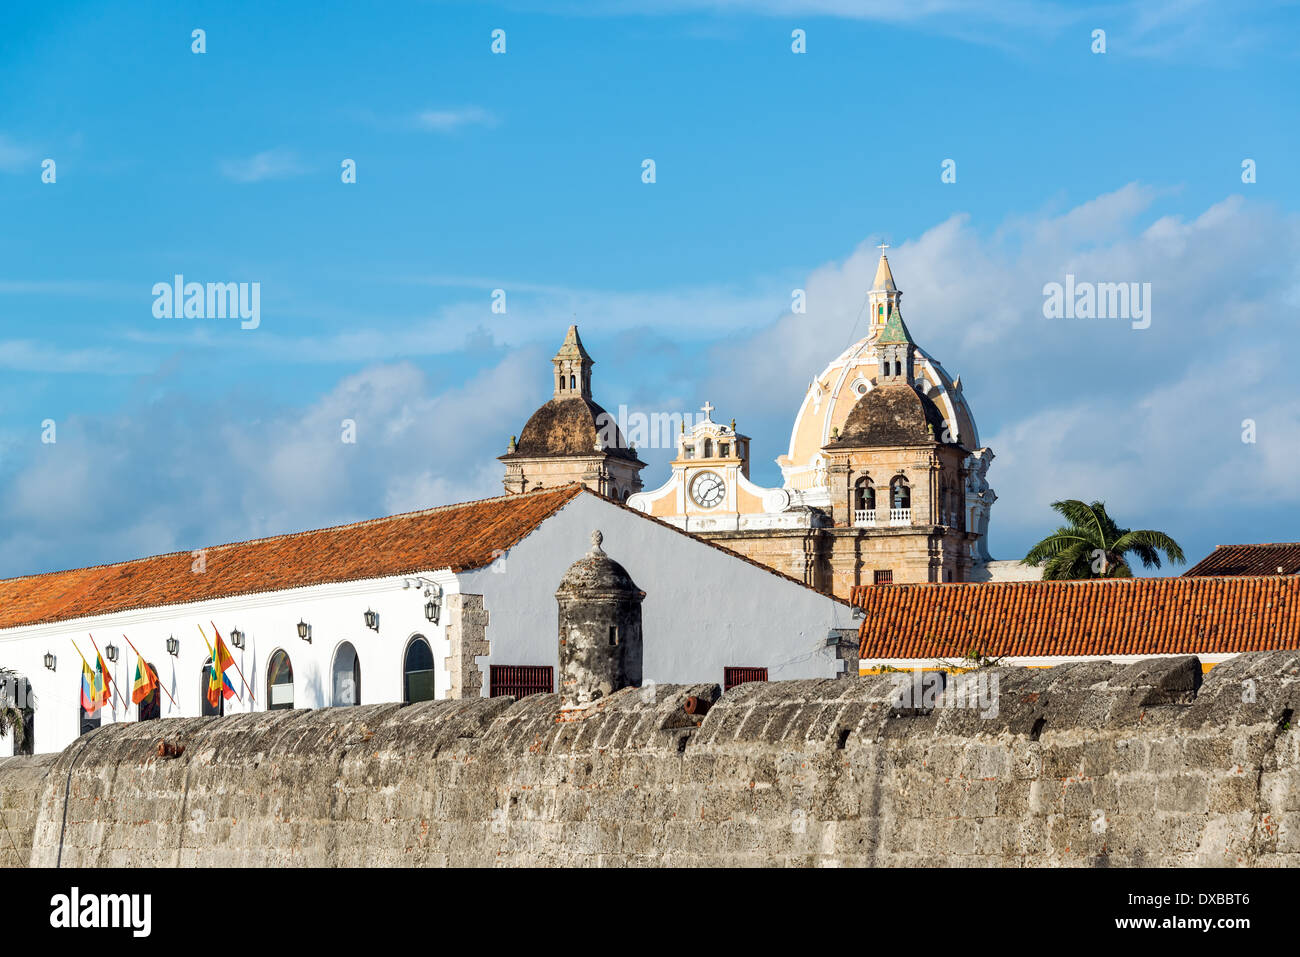 View of the historic center of UNESCO World Heritage site of Cartagena, Colombia Stock Photo